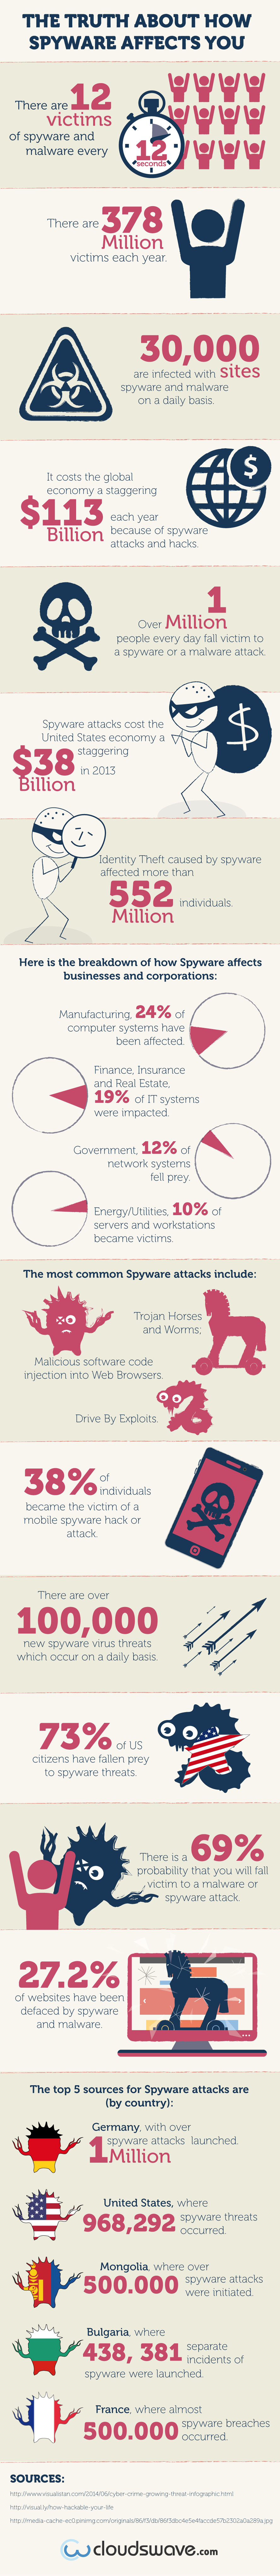 The Truth About How Spyware Affects You